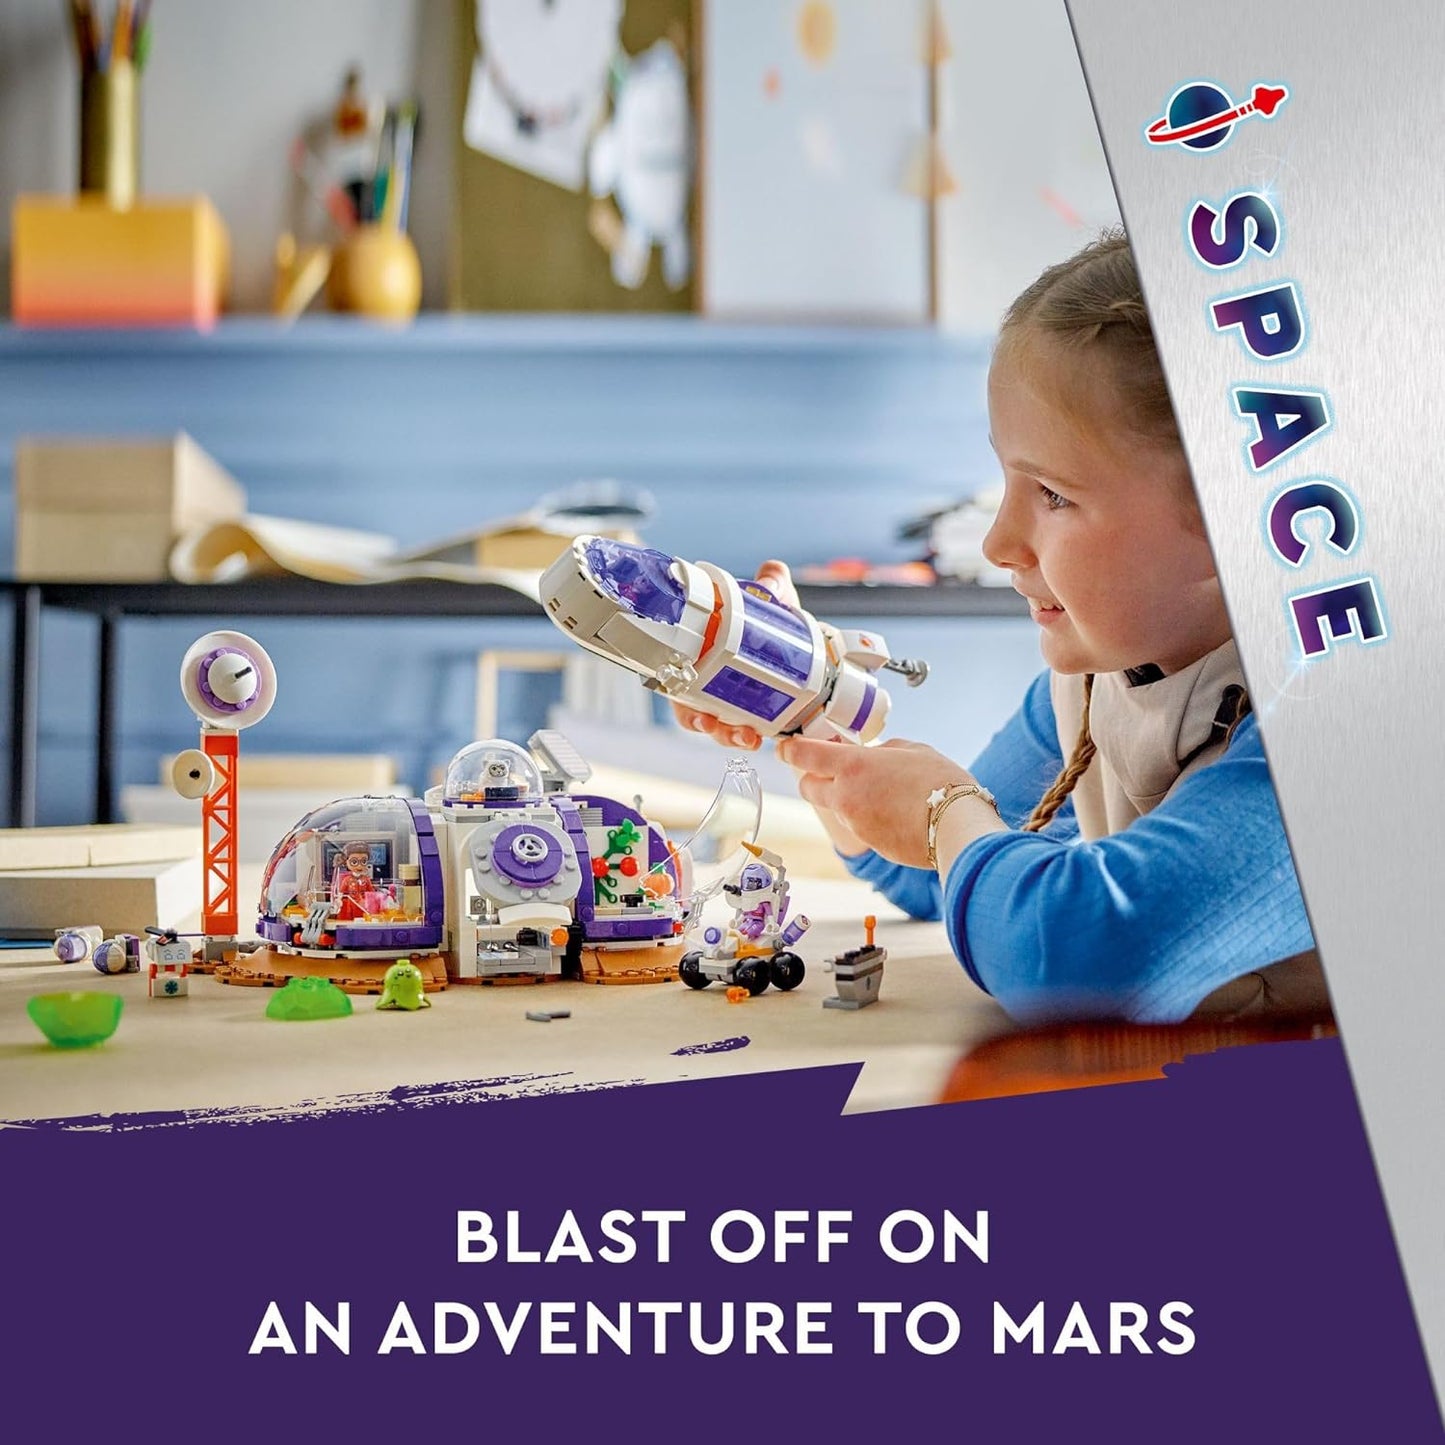 LEGO Friends Mars Space Base and Rocket Set, Science Toy for Pretend Play with 3 Mini-Dolls and Spaceship Toy, Gift for Girls, Boys and Kids Ages 8 and Up who Love Tech and Outer Space Toys, 42605